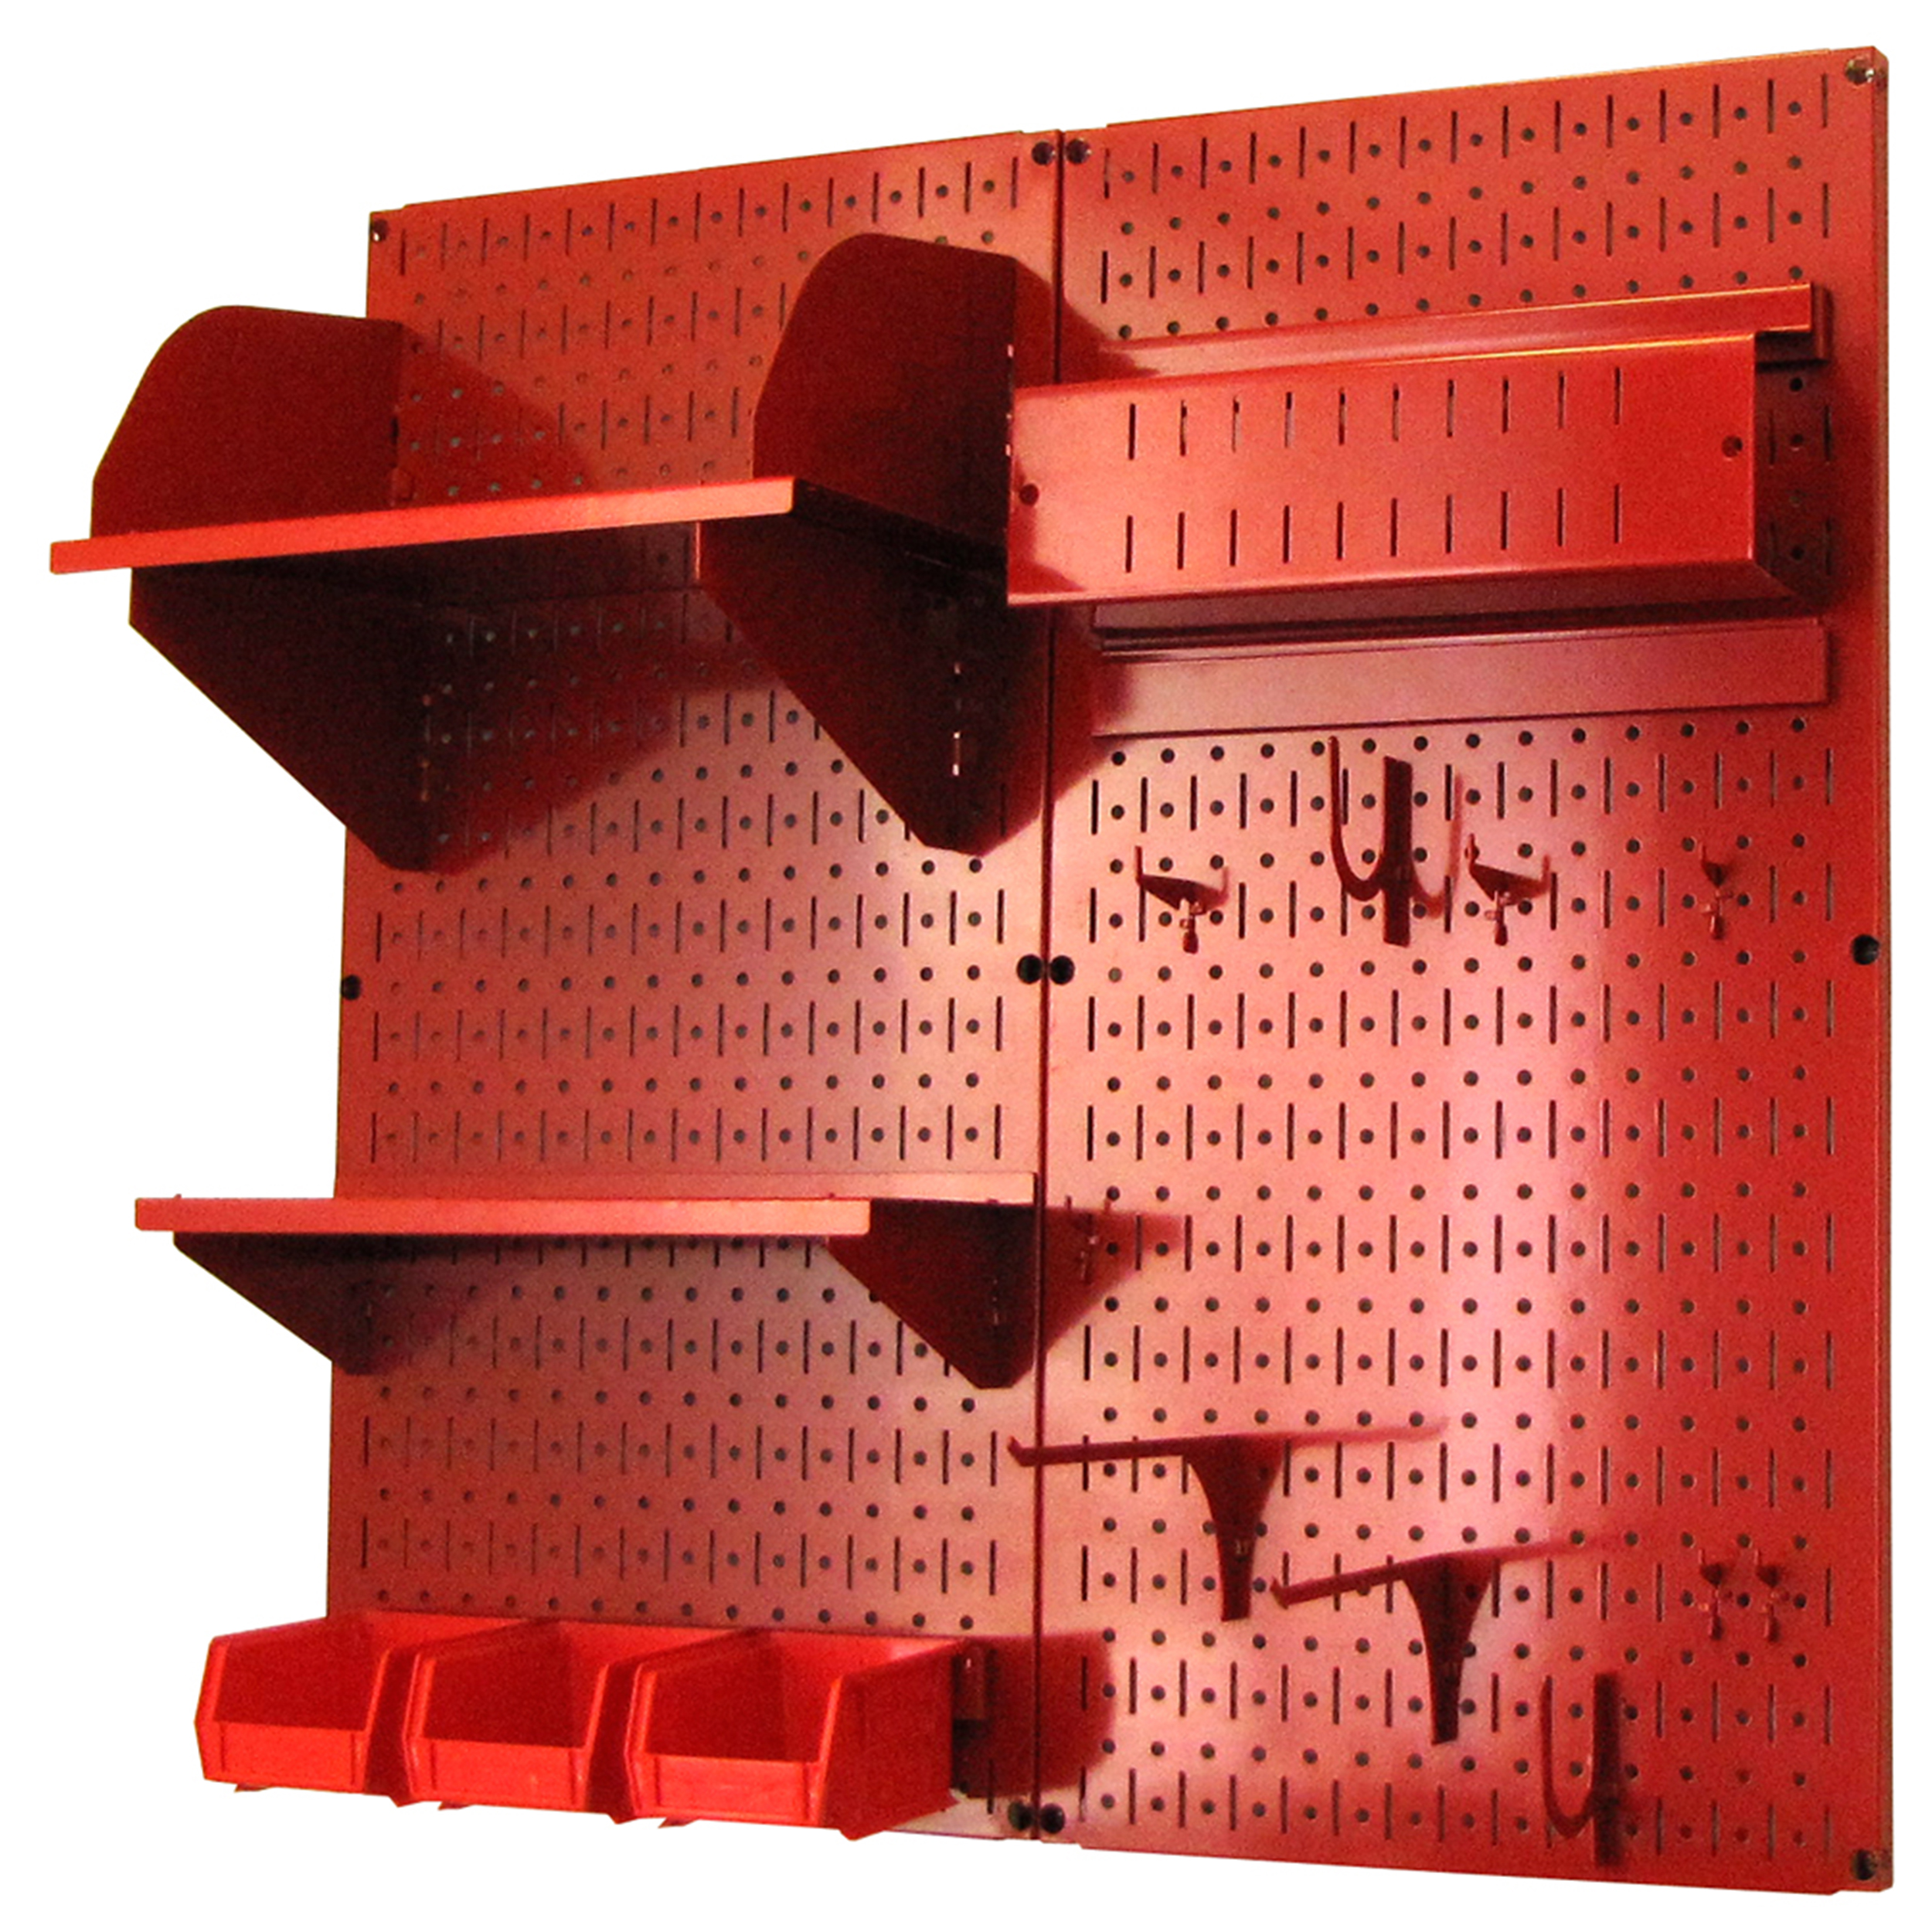 Pegboard Hobby Craft Pegboard Organizer Storage Kit With Red Pegboard And Red Accessories